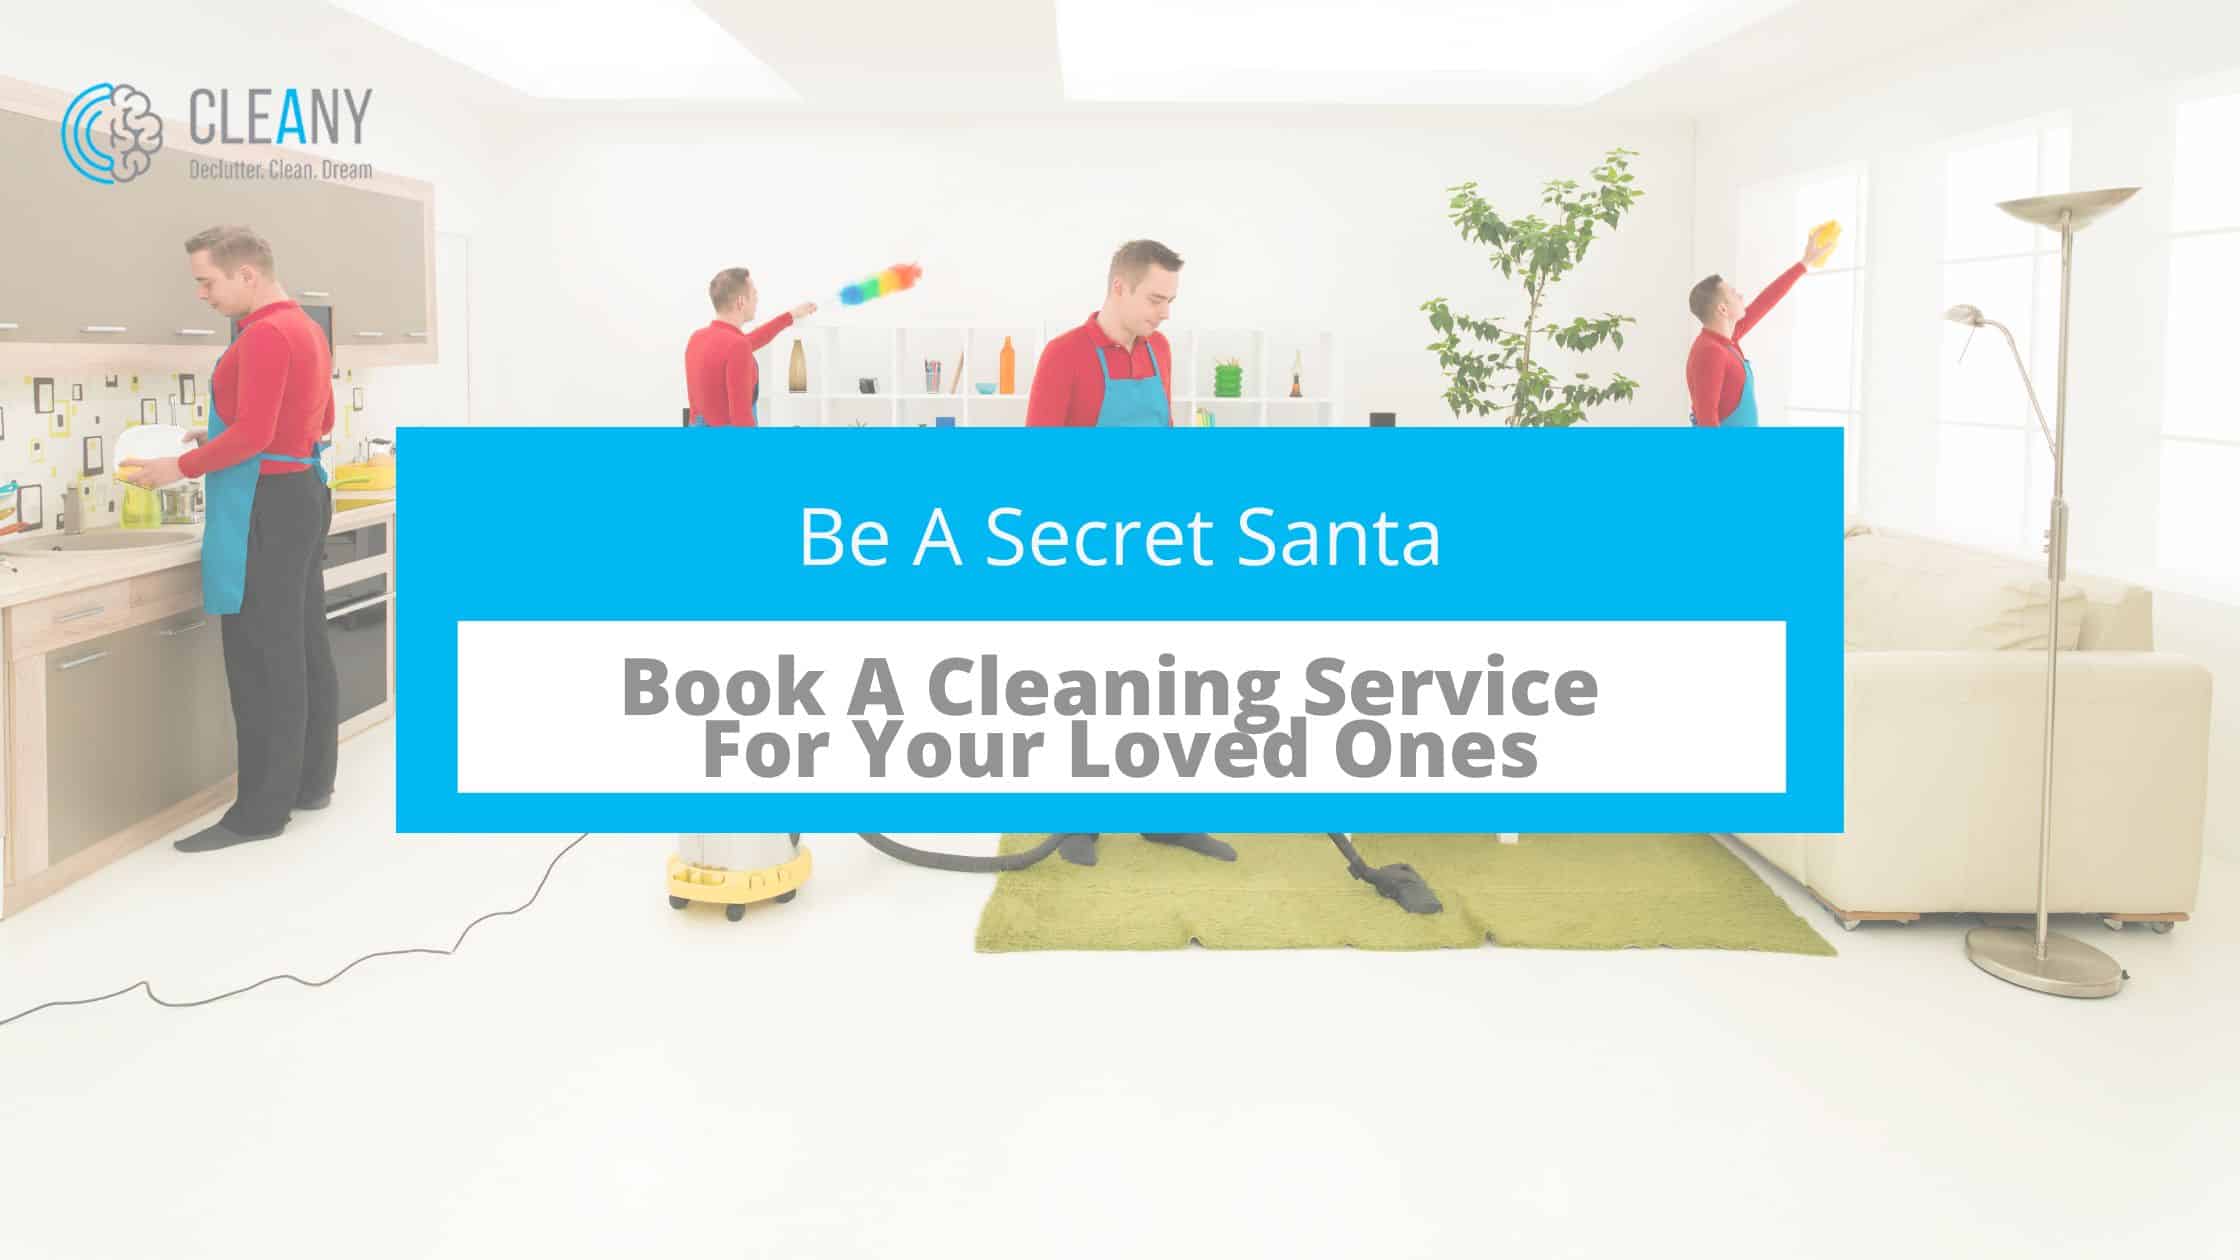 Book a cleaning service